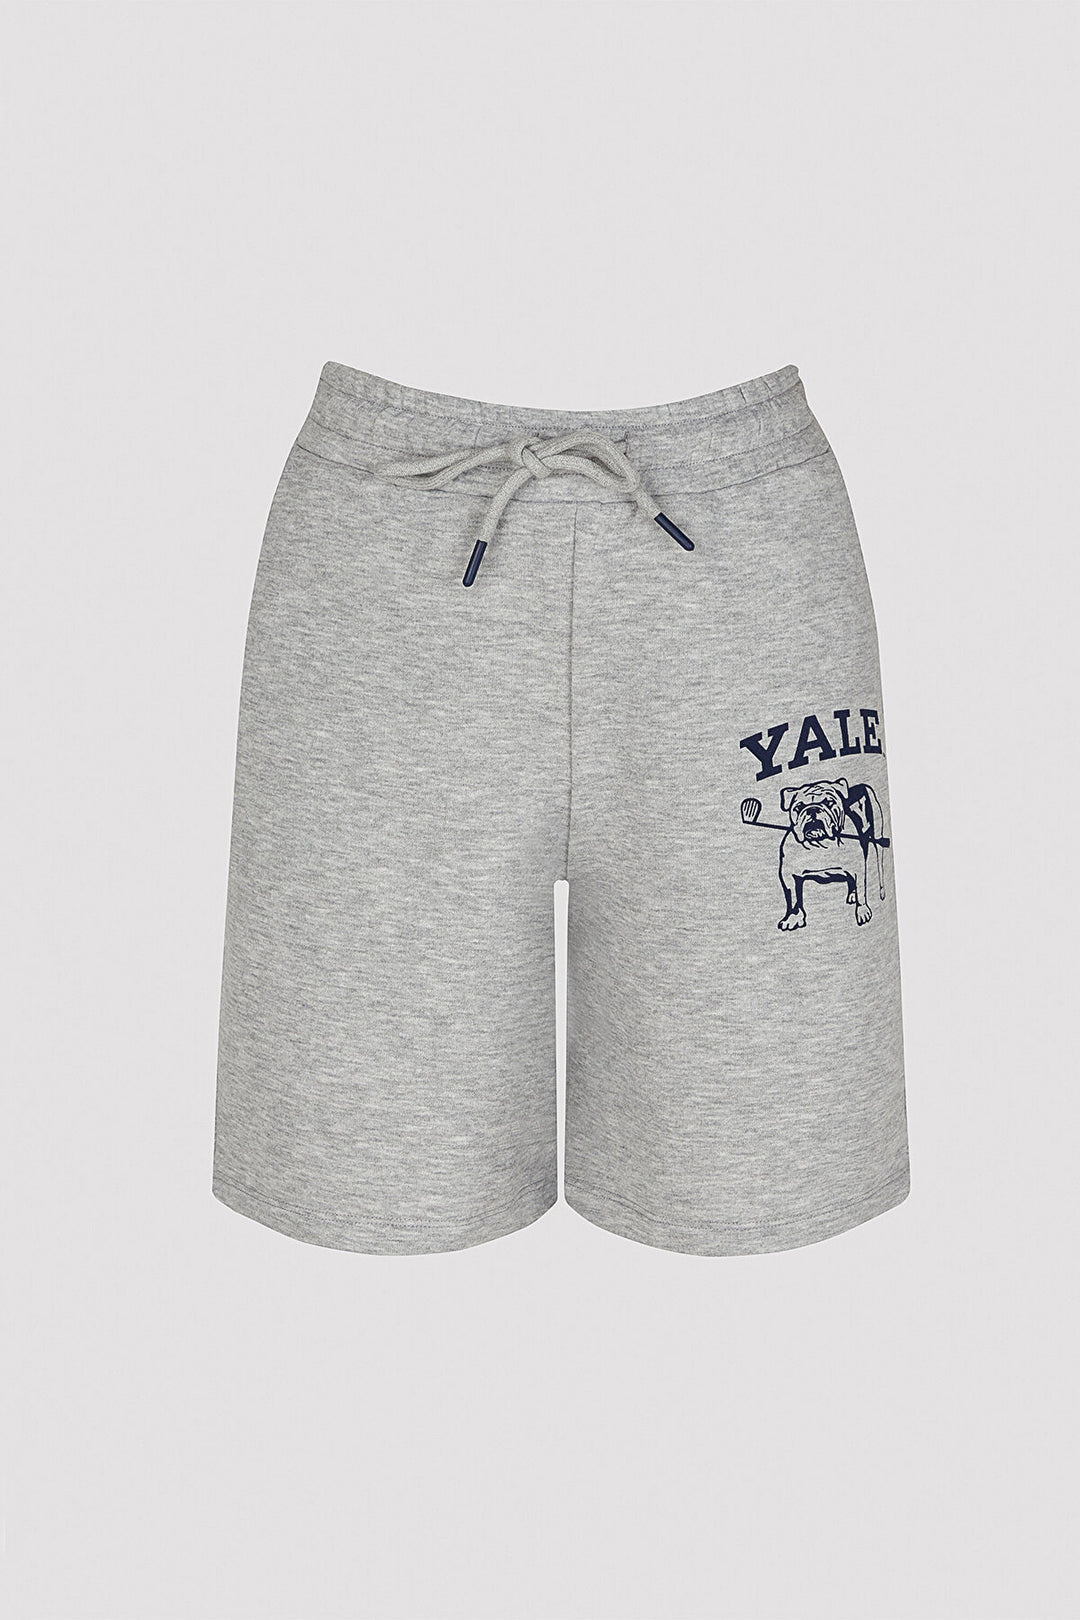 Yale Printed Grey Shorts - Unique Collection